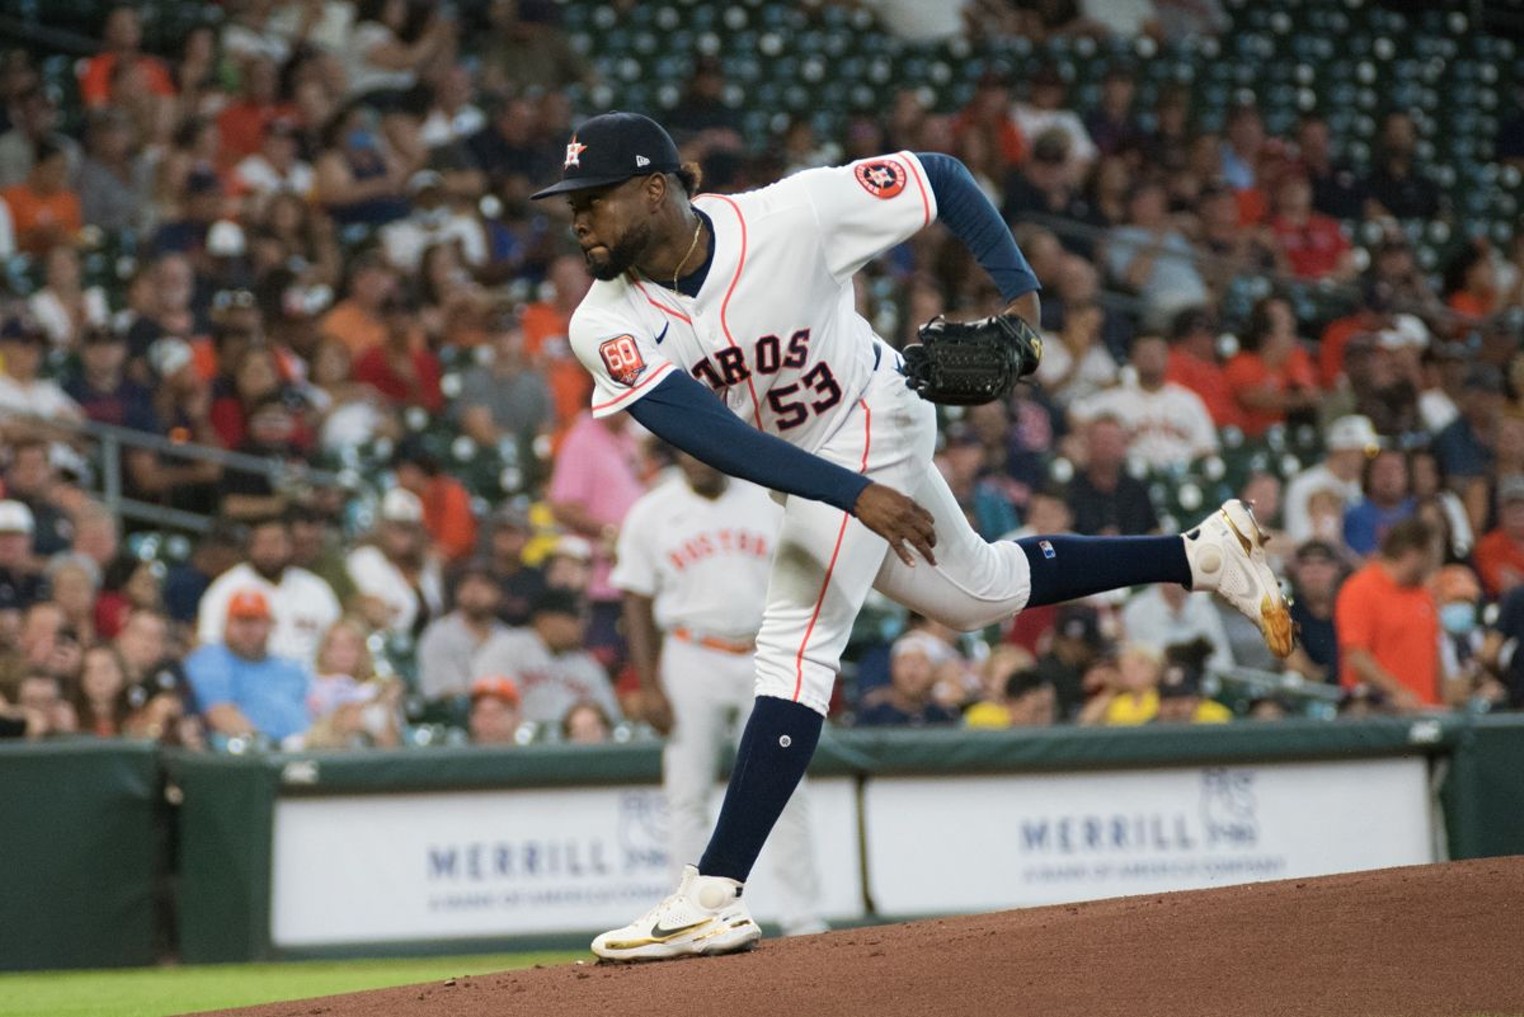 Astros tender 2022 contracts to arbitration-eligible players